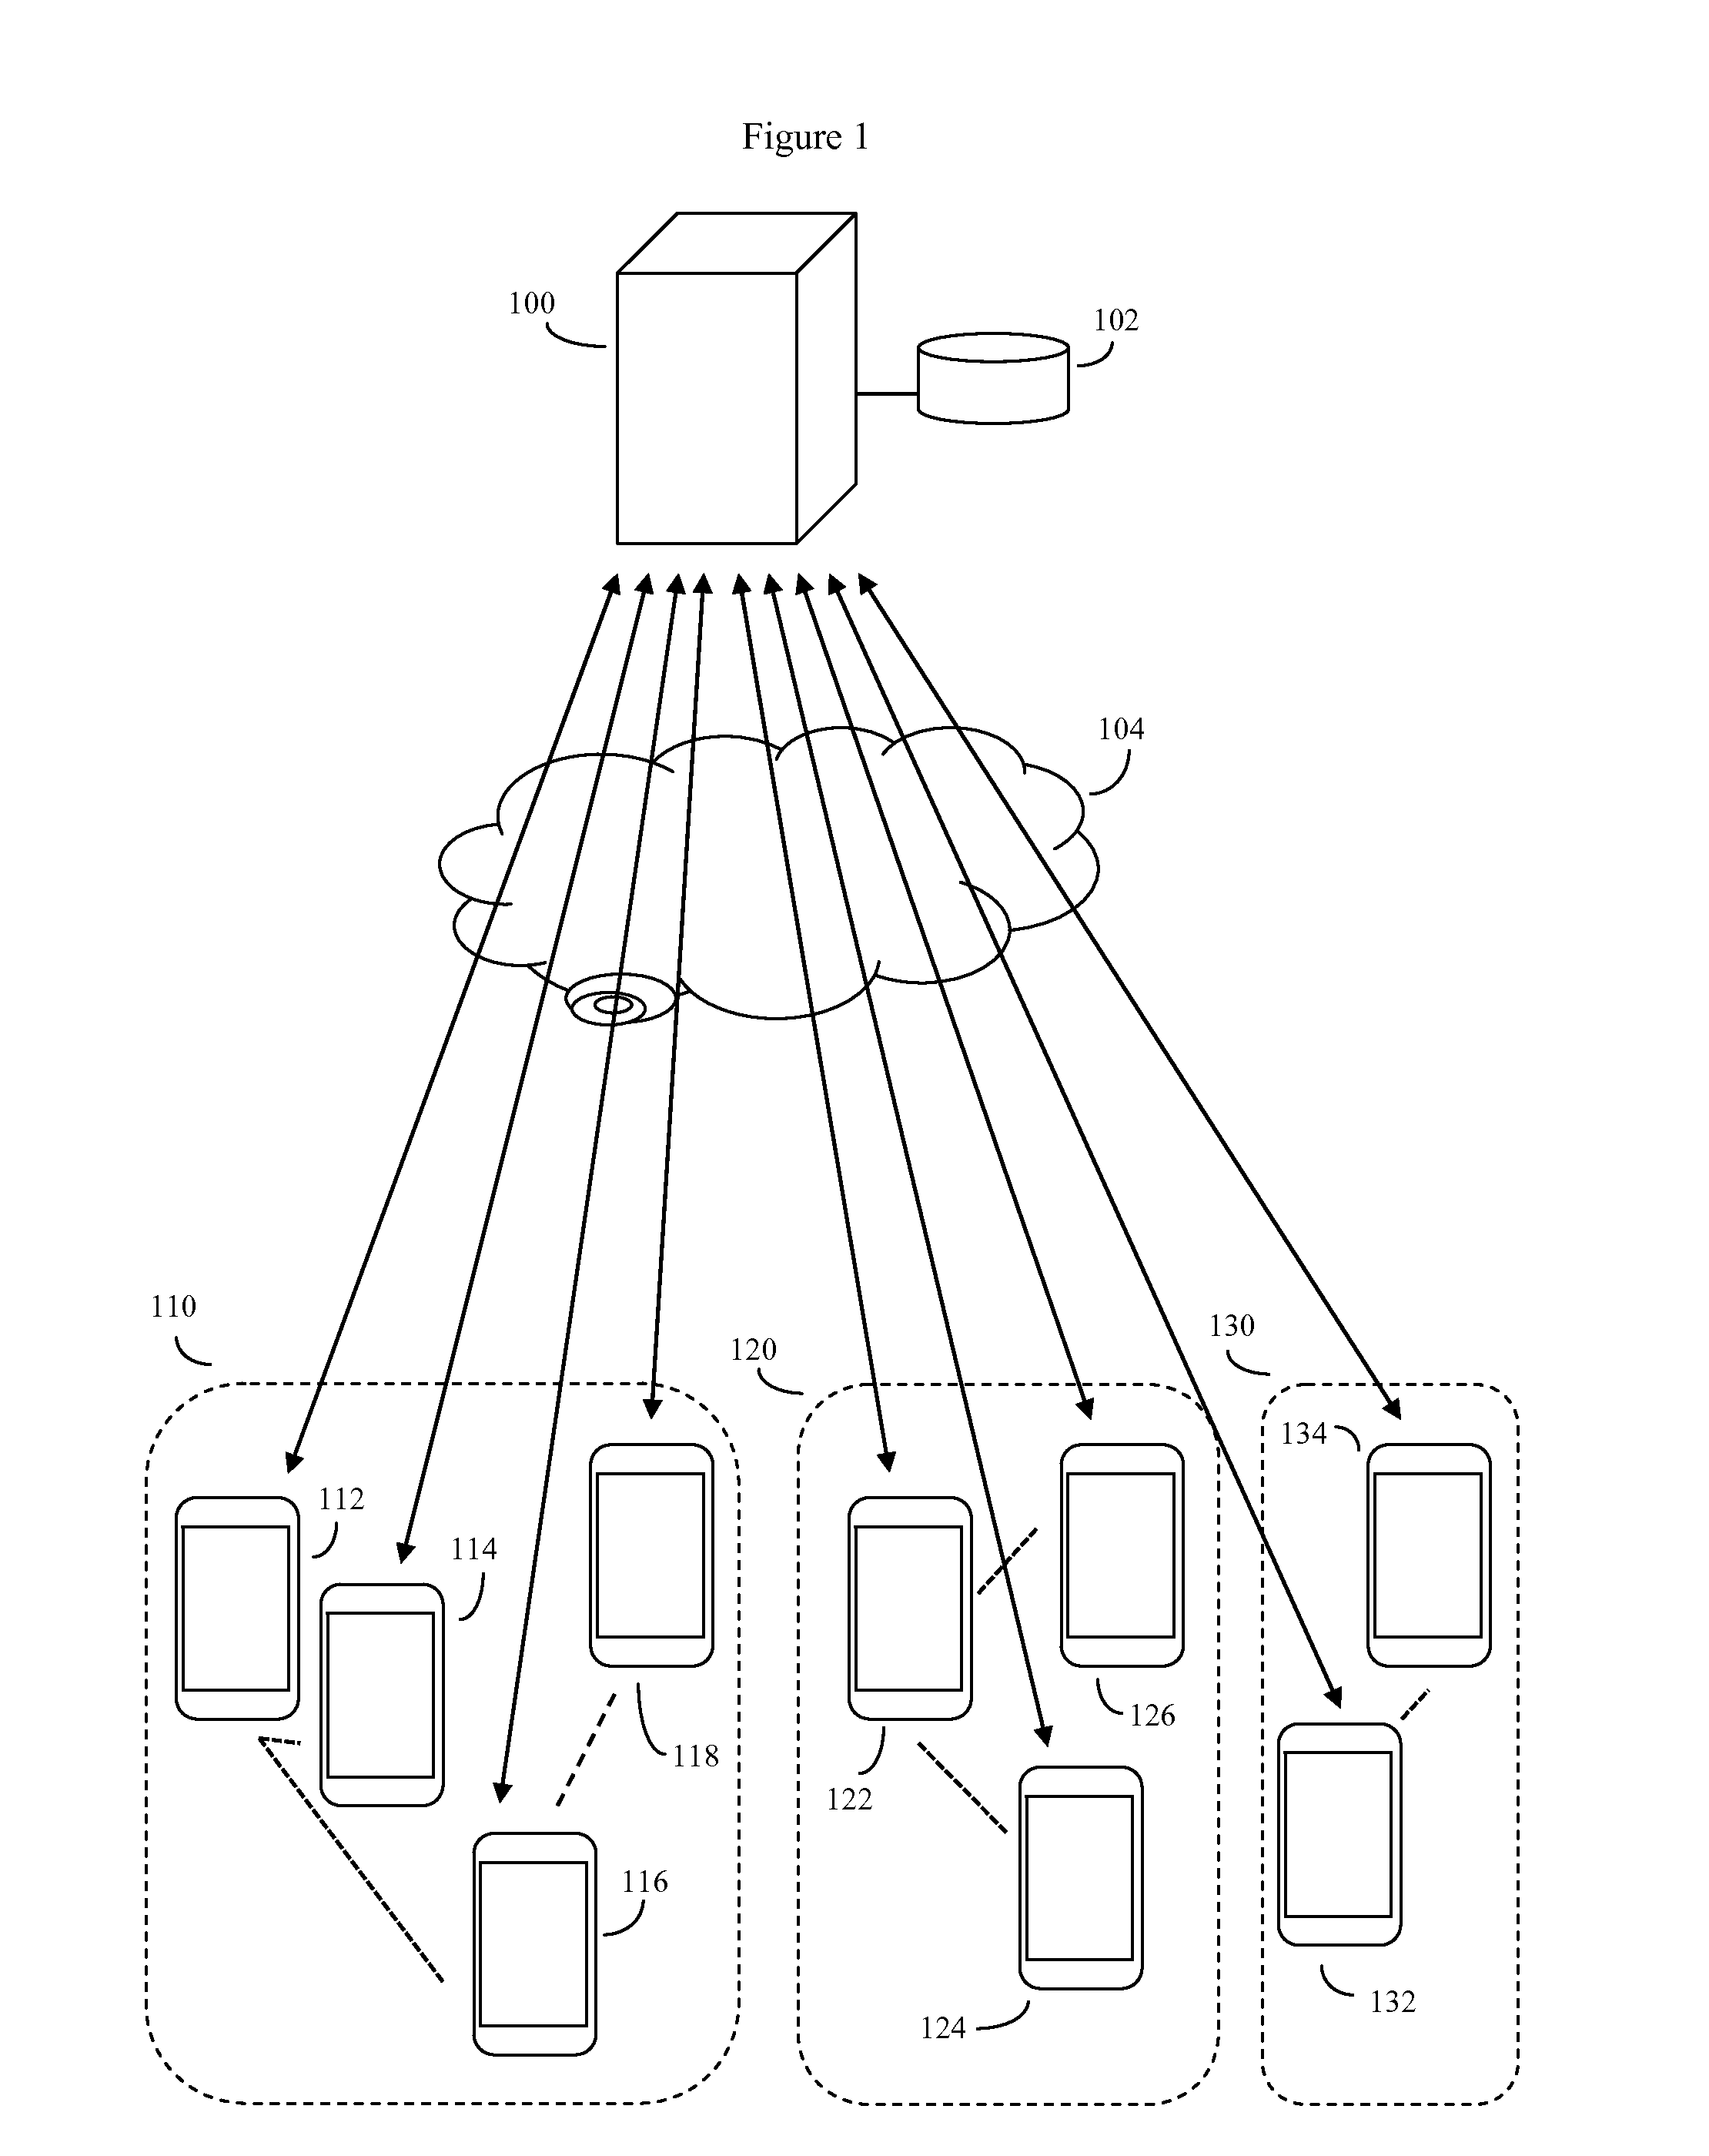 System and method for providing automated clothing fashion recommendations